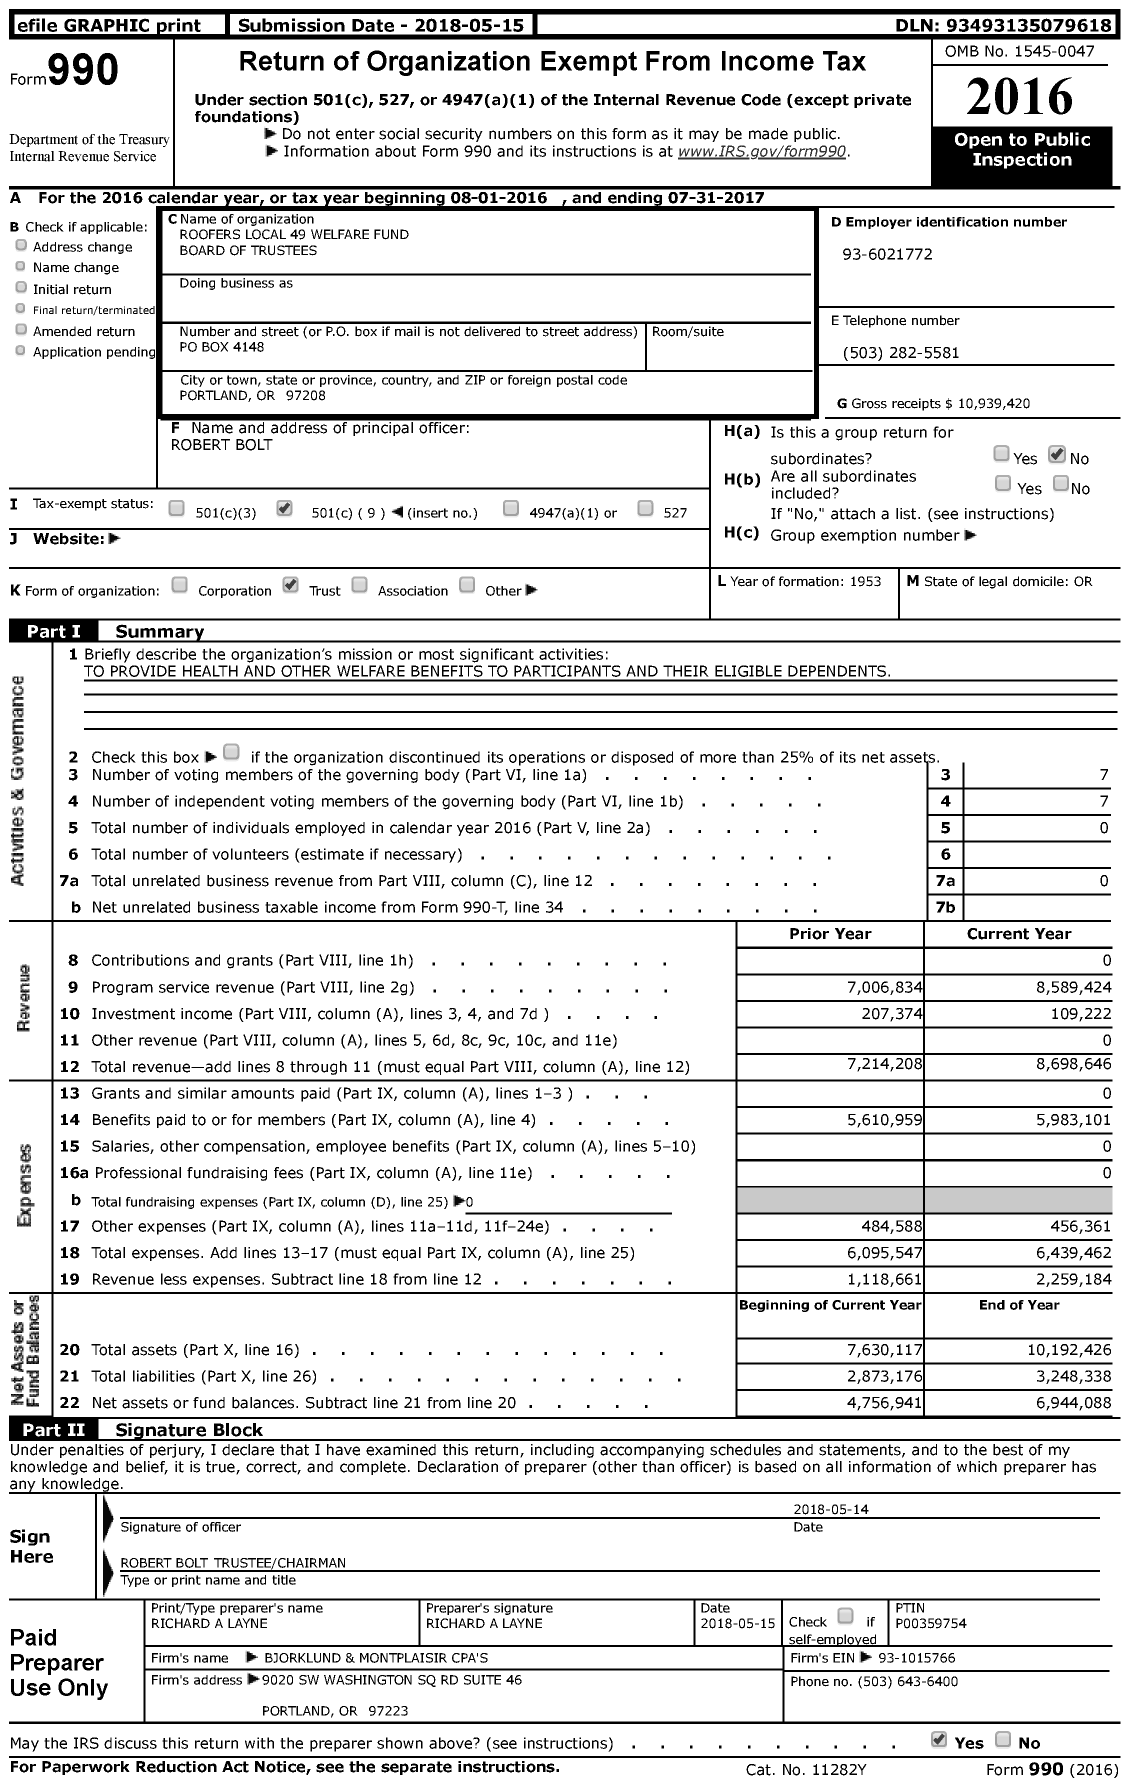 Image of first page of 2016 Form 990 for Roofers Local 49 Welfare Fund Board of Trustees